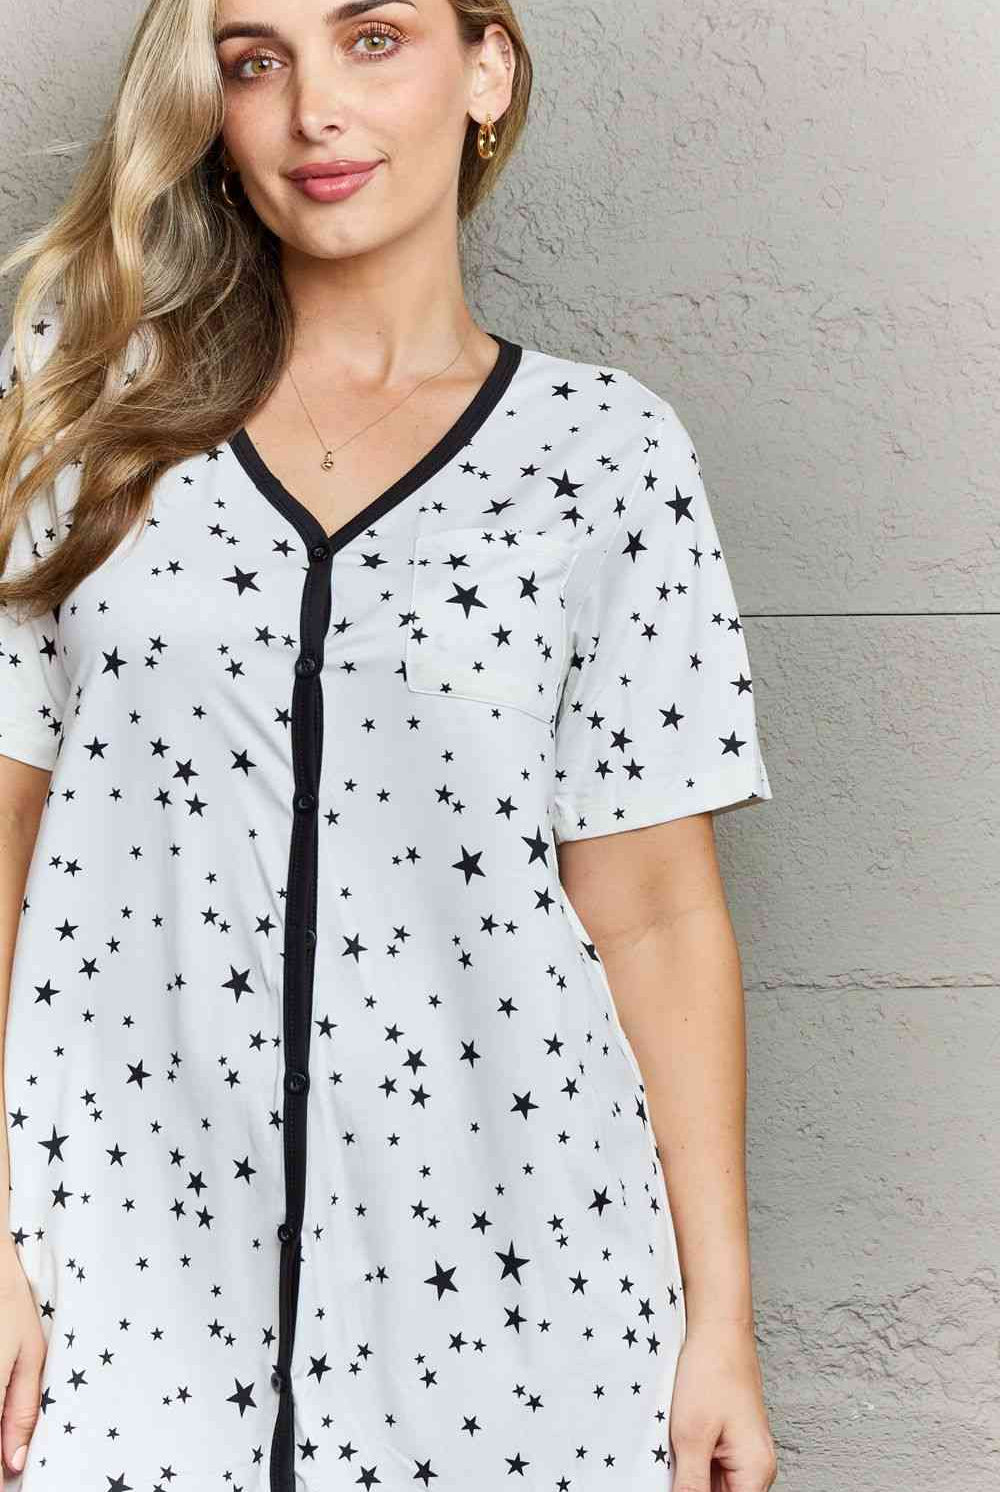 Gray MOON NITE Quilted Quivers Button Down Sleepwear Dress Clothing